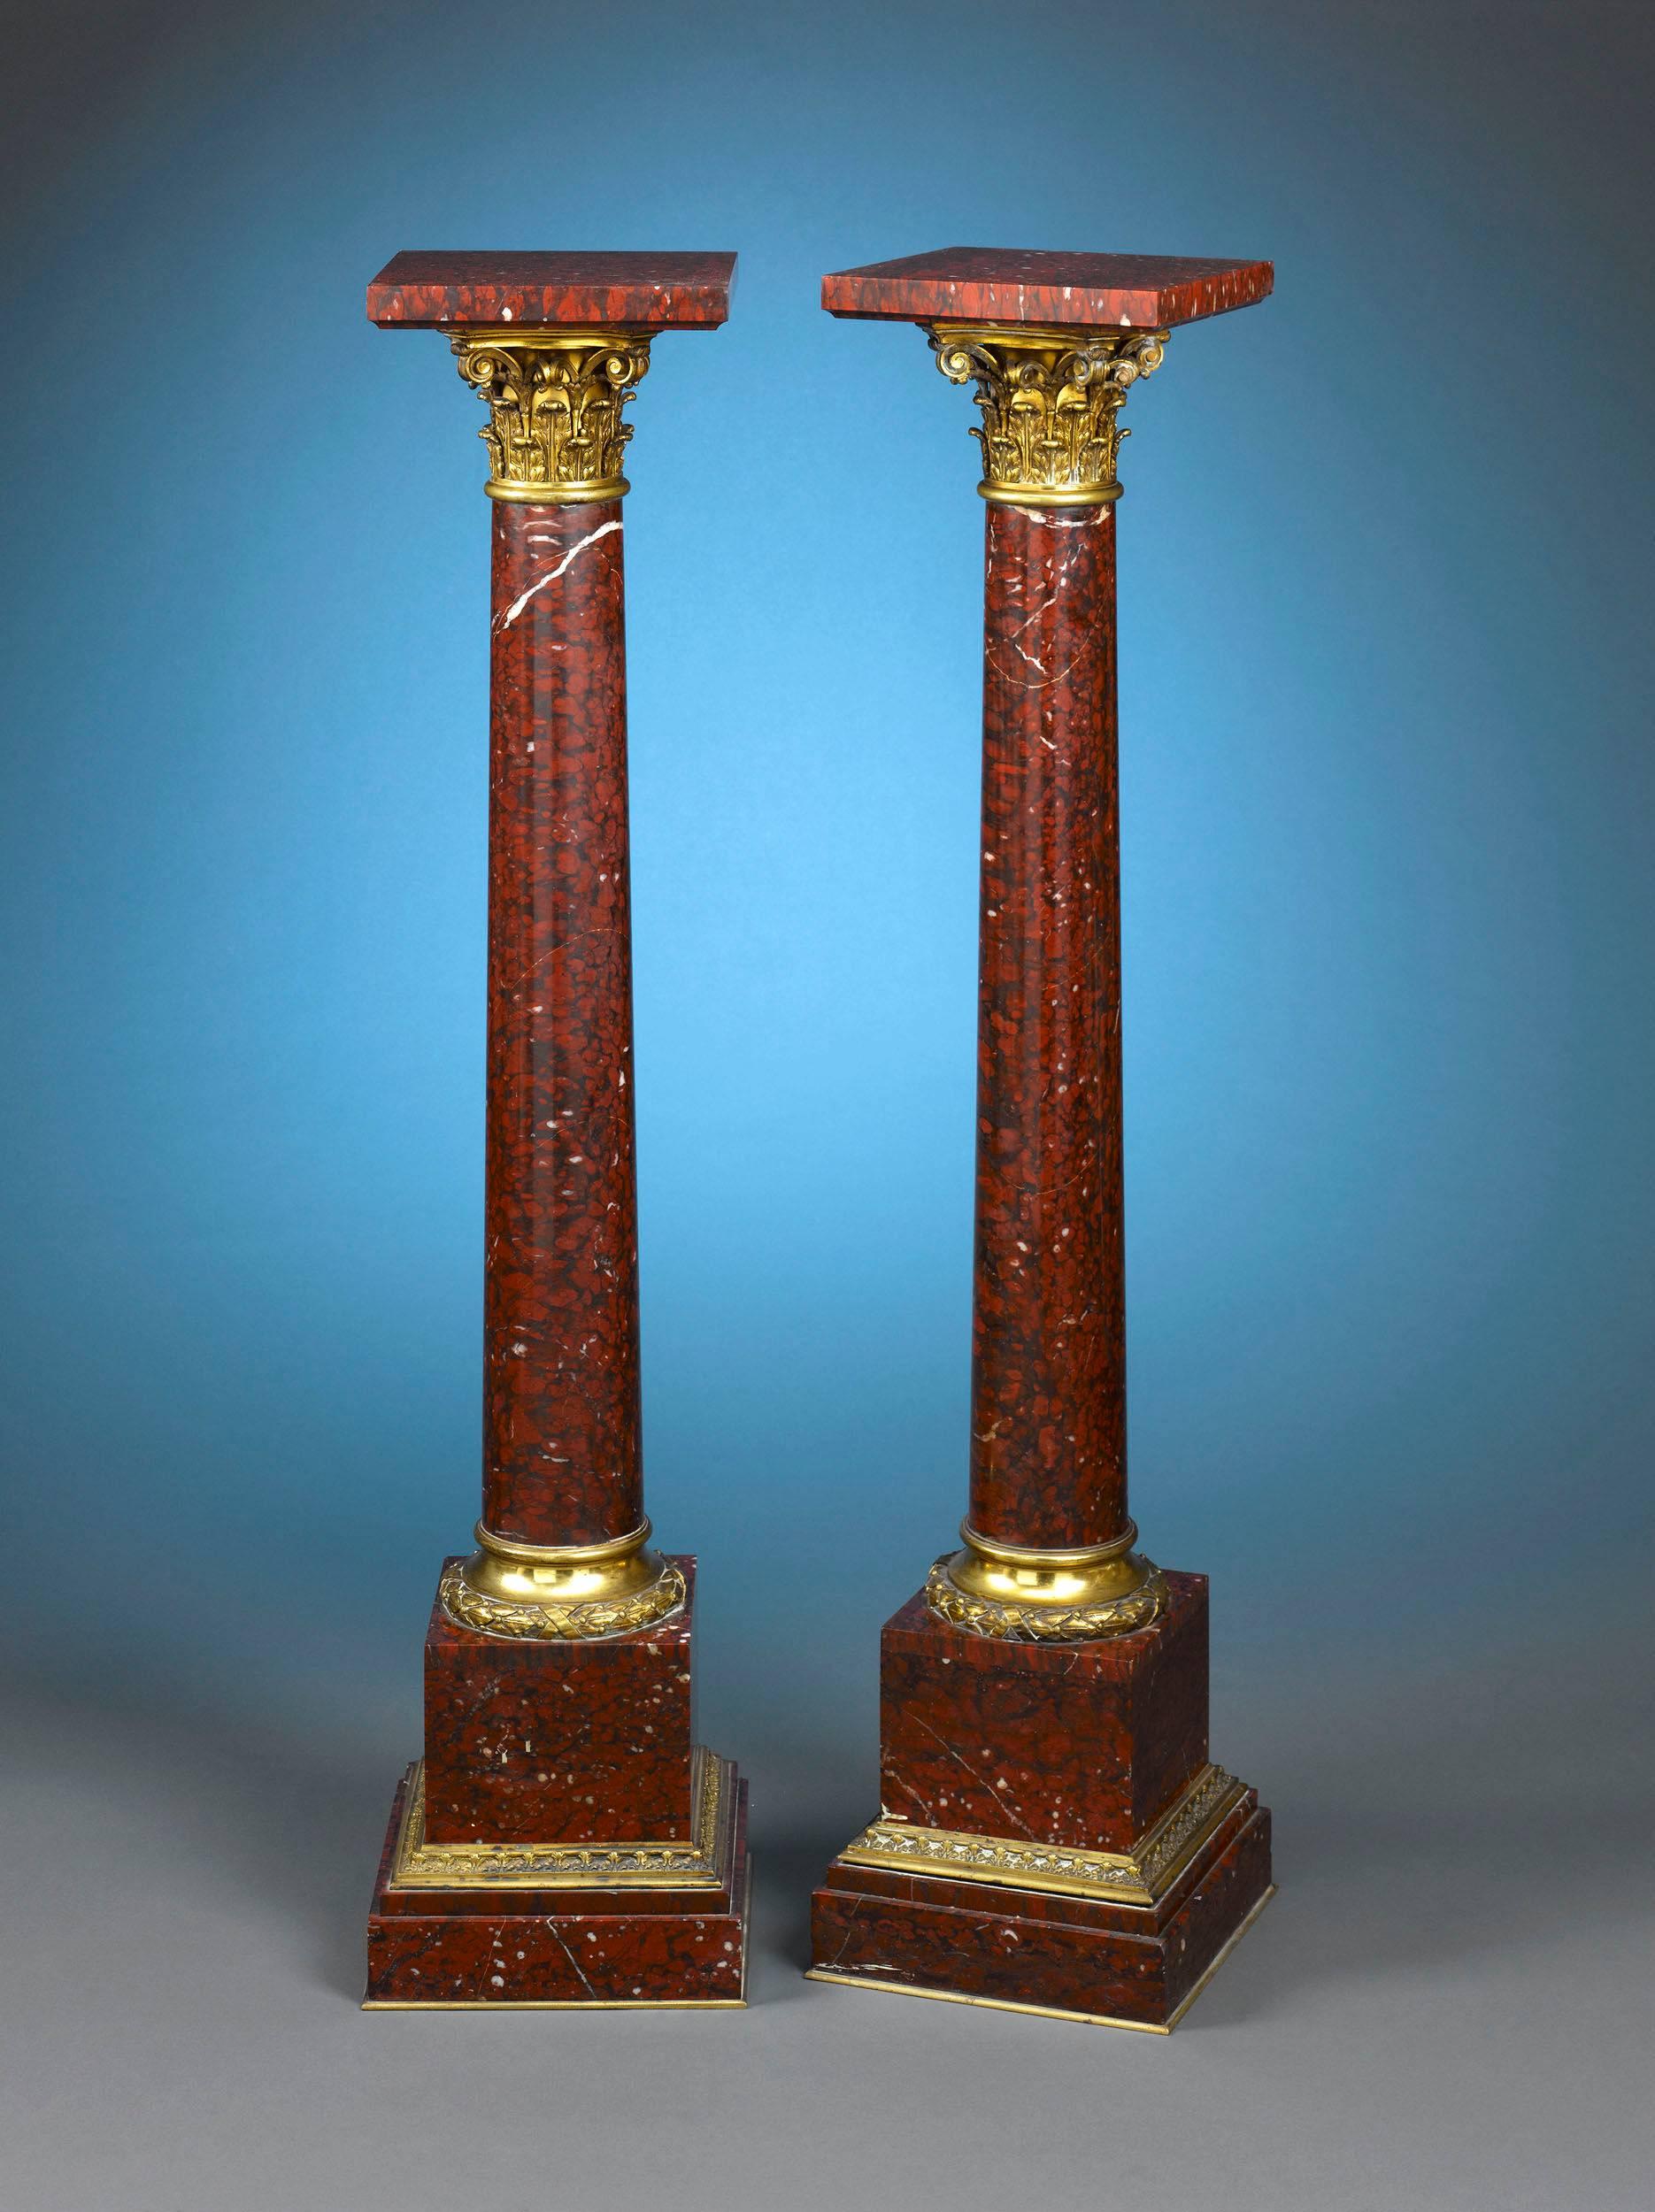 This spectacular pair of marble and doré bronze pedestals is hewn from the finest French 